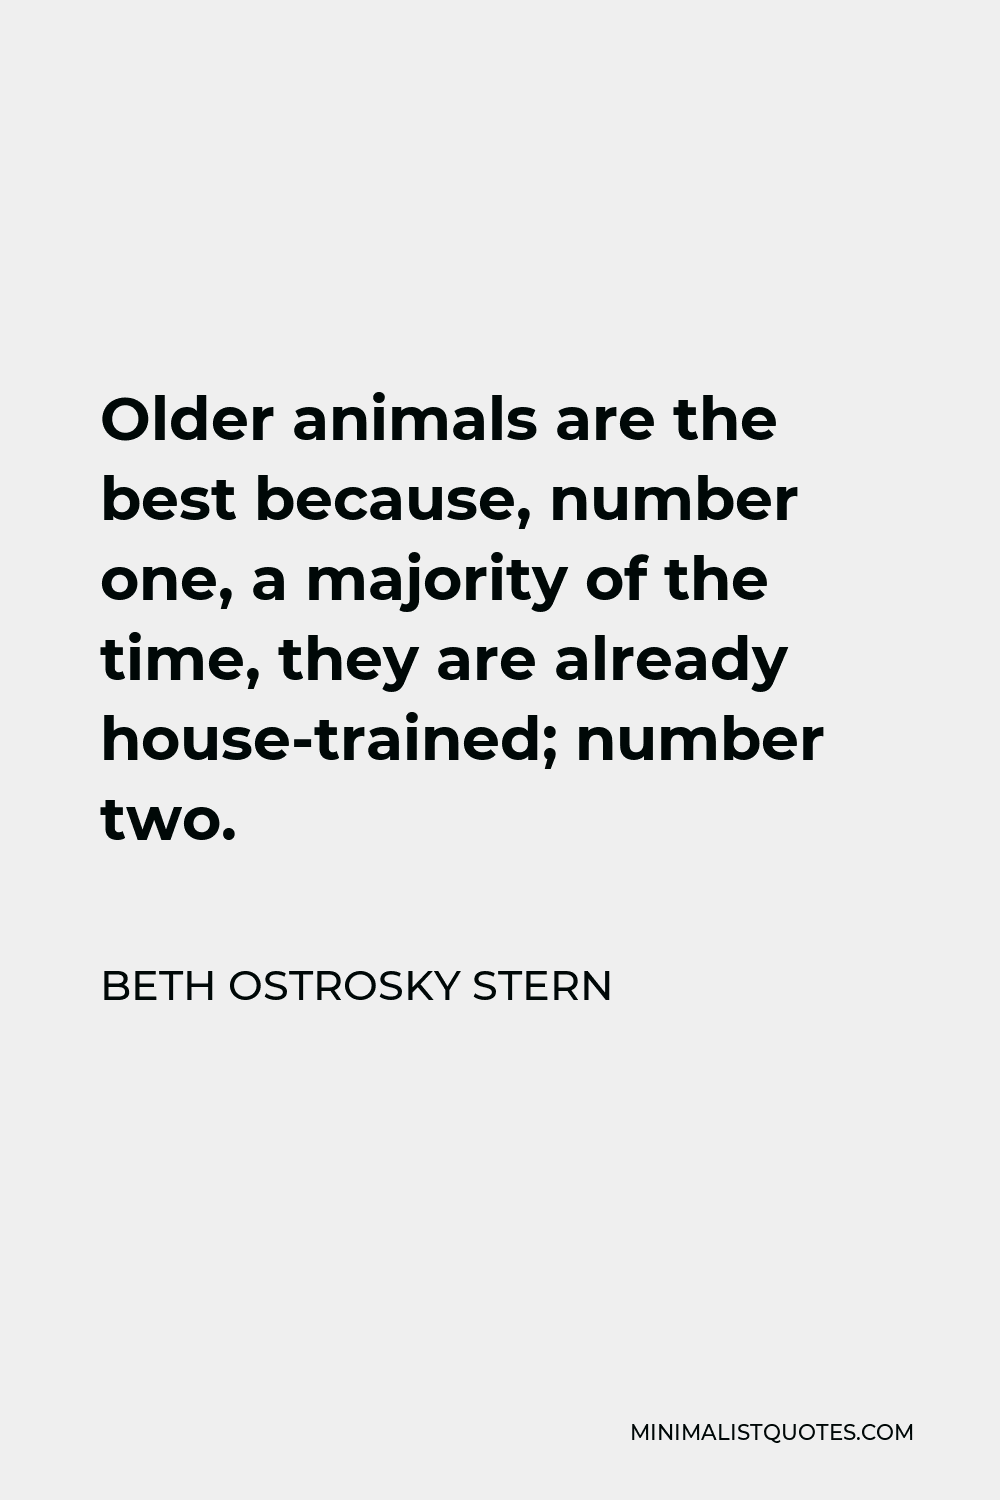 Beth Ostrosky Stern Quote - Older animals are the best because, number one, a majority of the time, they are already house-trained; number two.